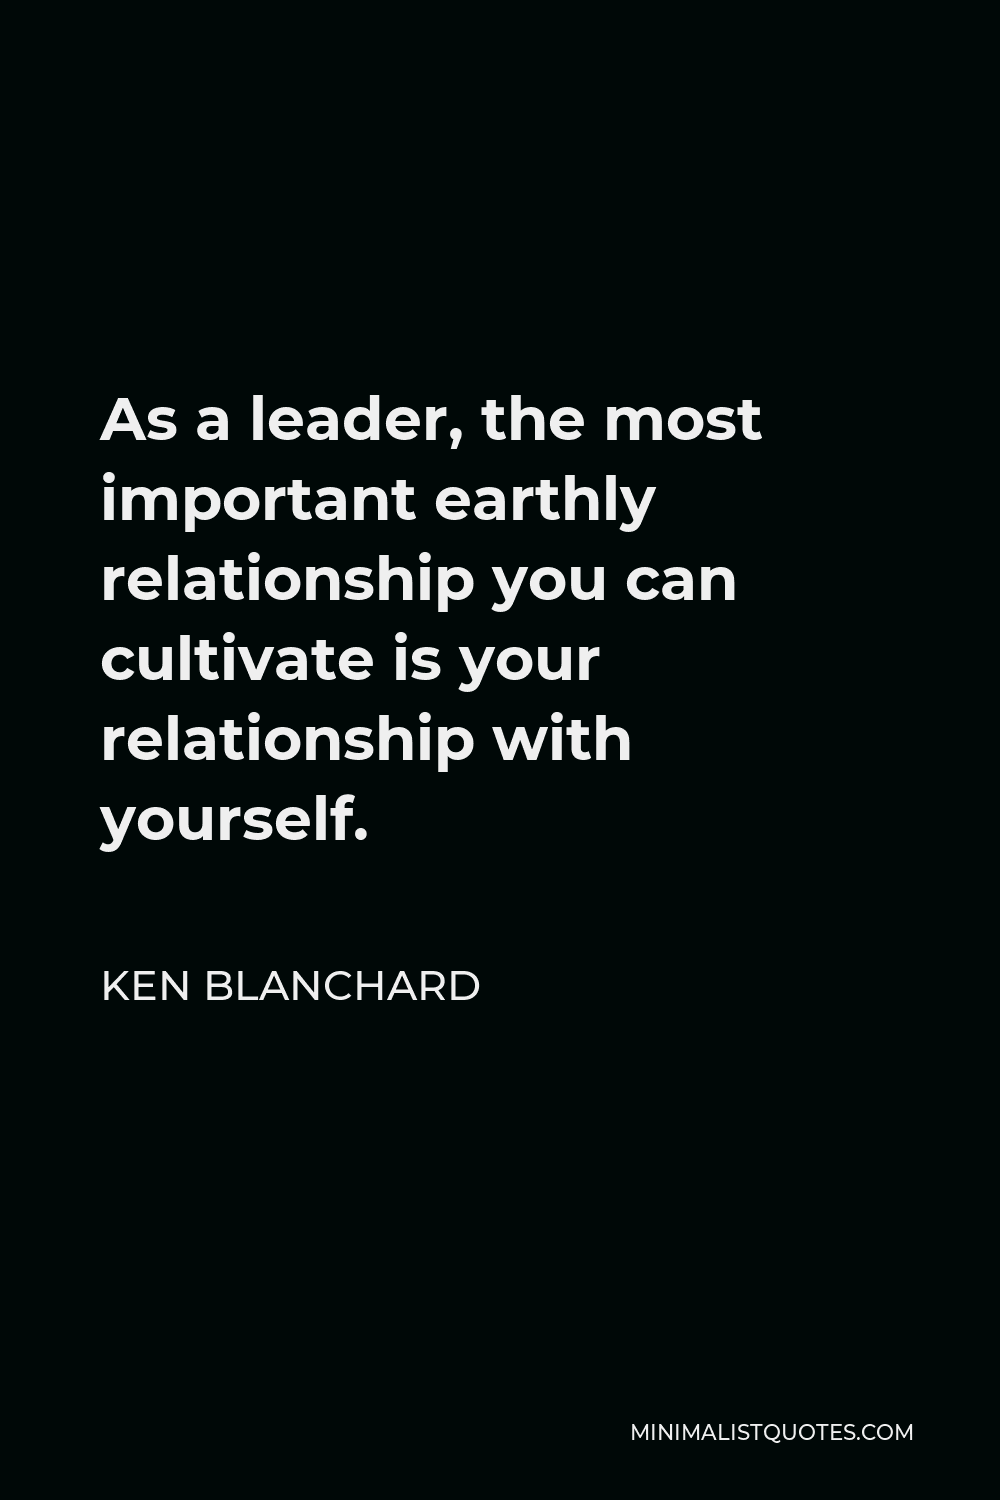 Ken Blanchard Quote - As a leader, the most important earthly relationship you can cultivate is your relationship with yourself.